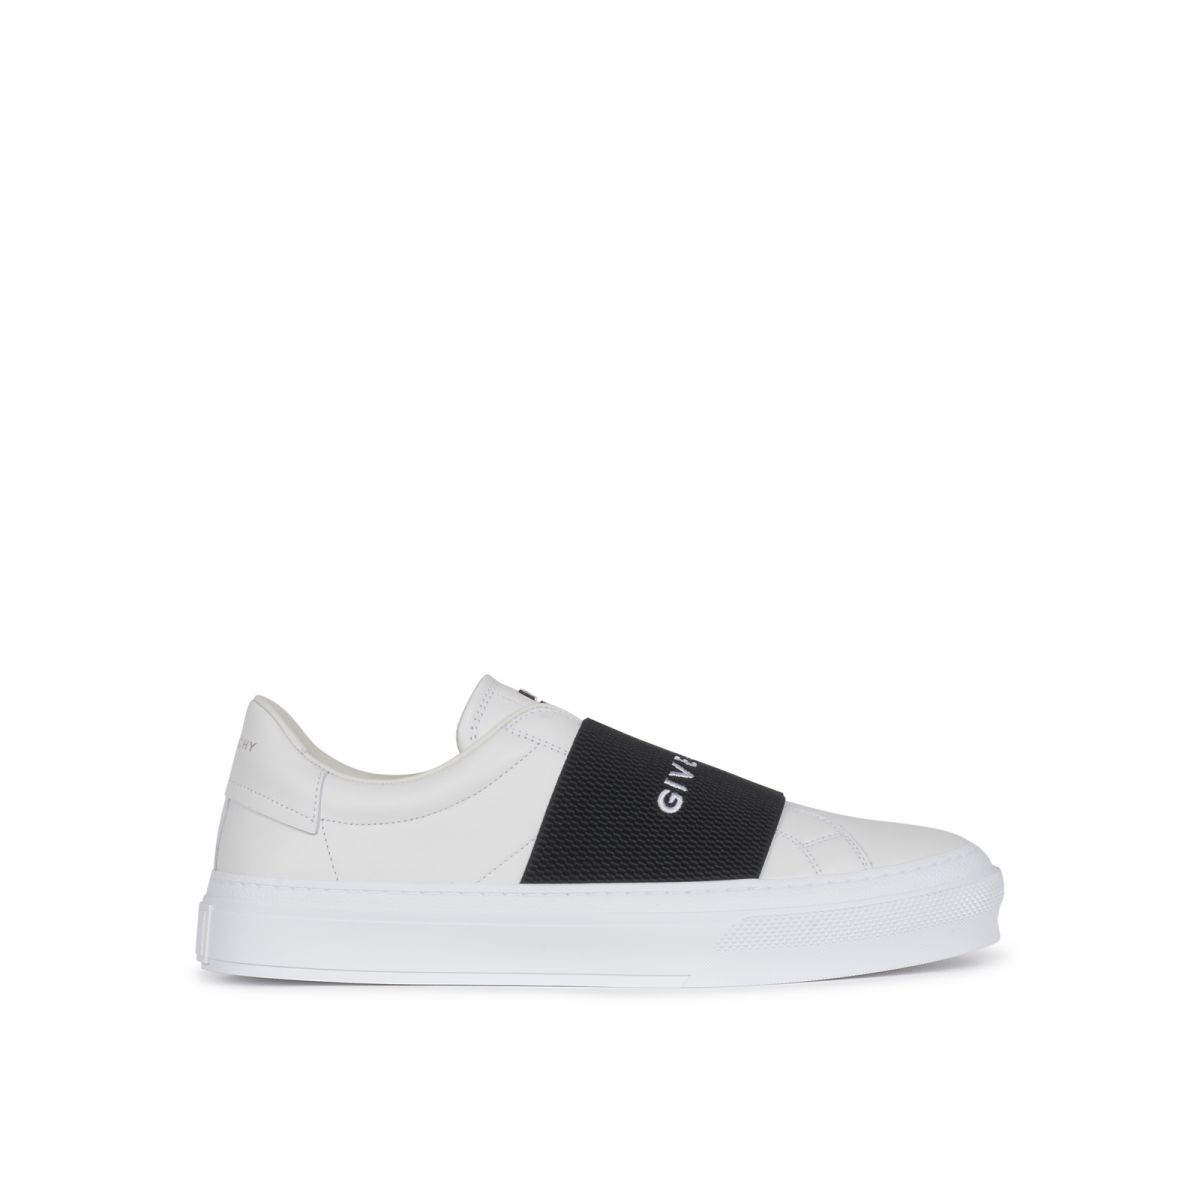 GIVENCHY - Sneakers - White